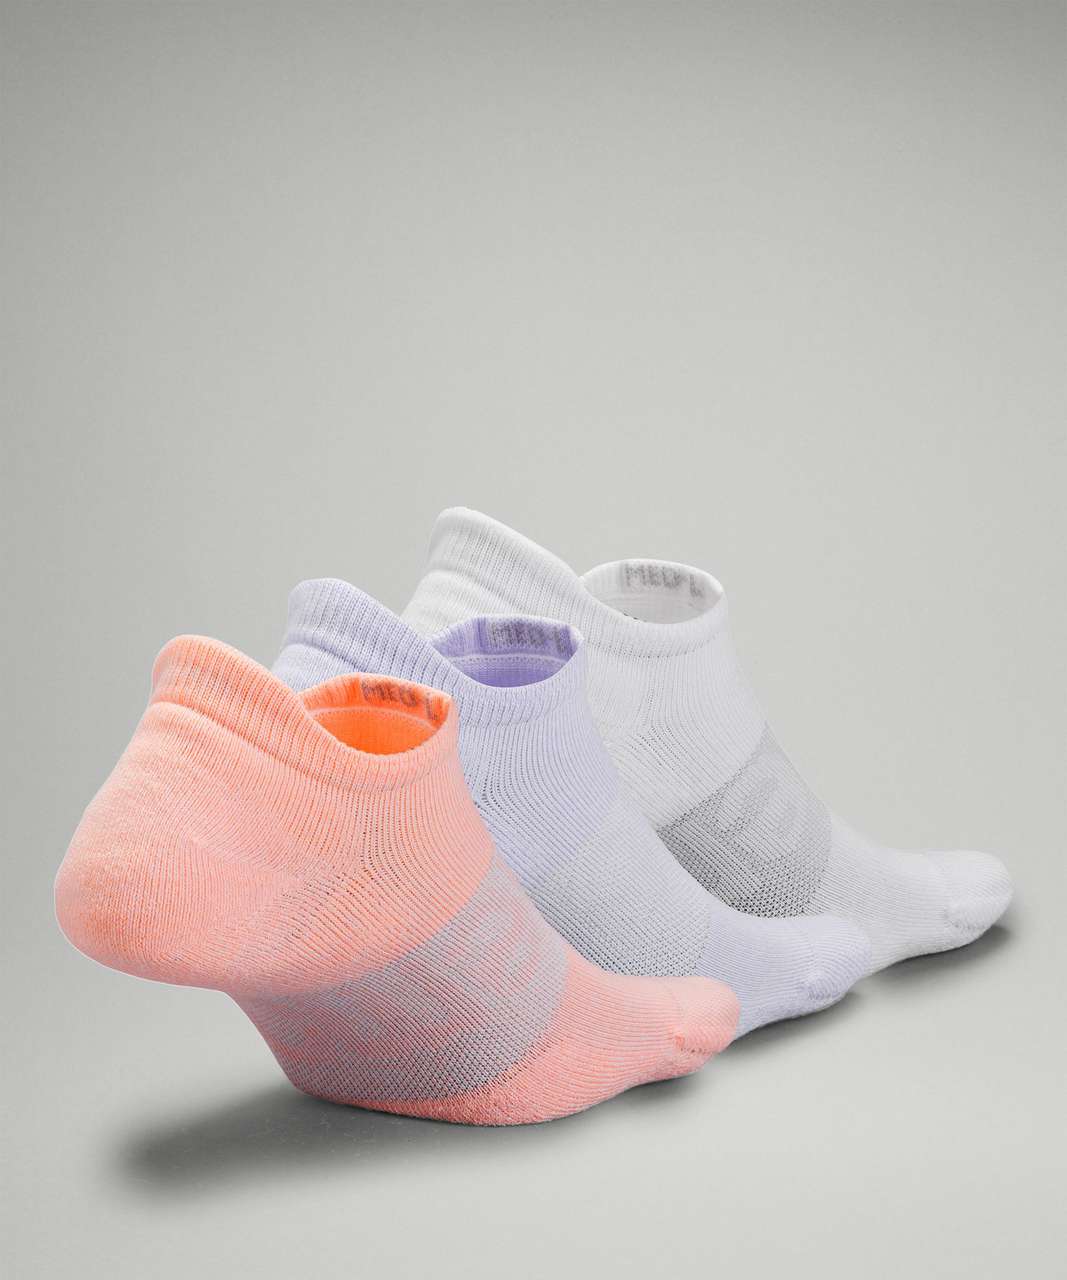 Lululemon Daily Stride Low-Ankle Sock 3 Pack - Dew Pink / Pastel Blue / White